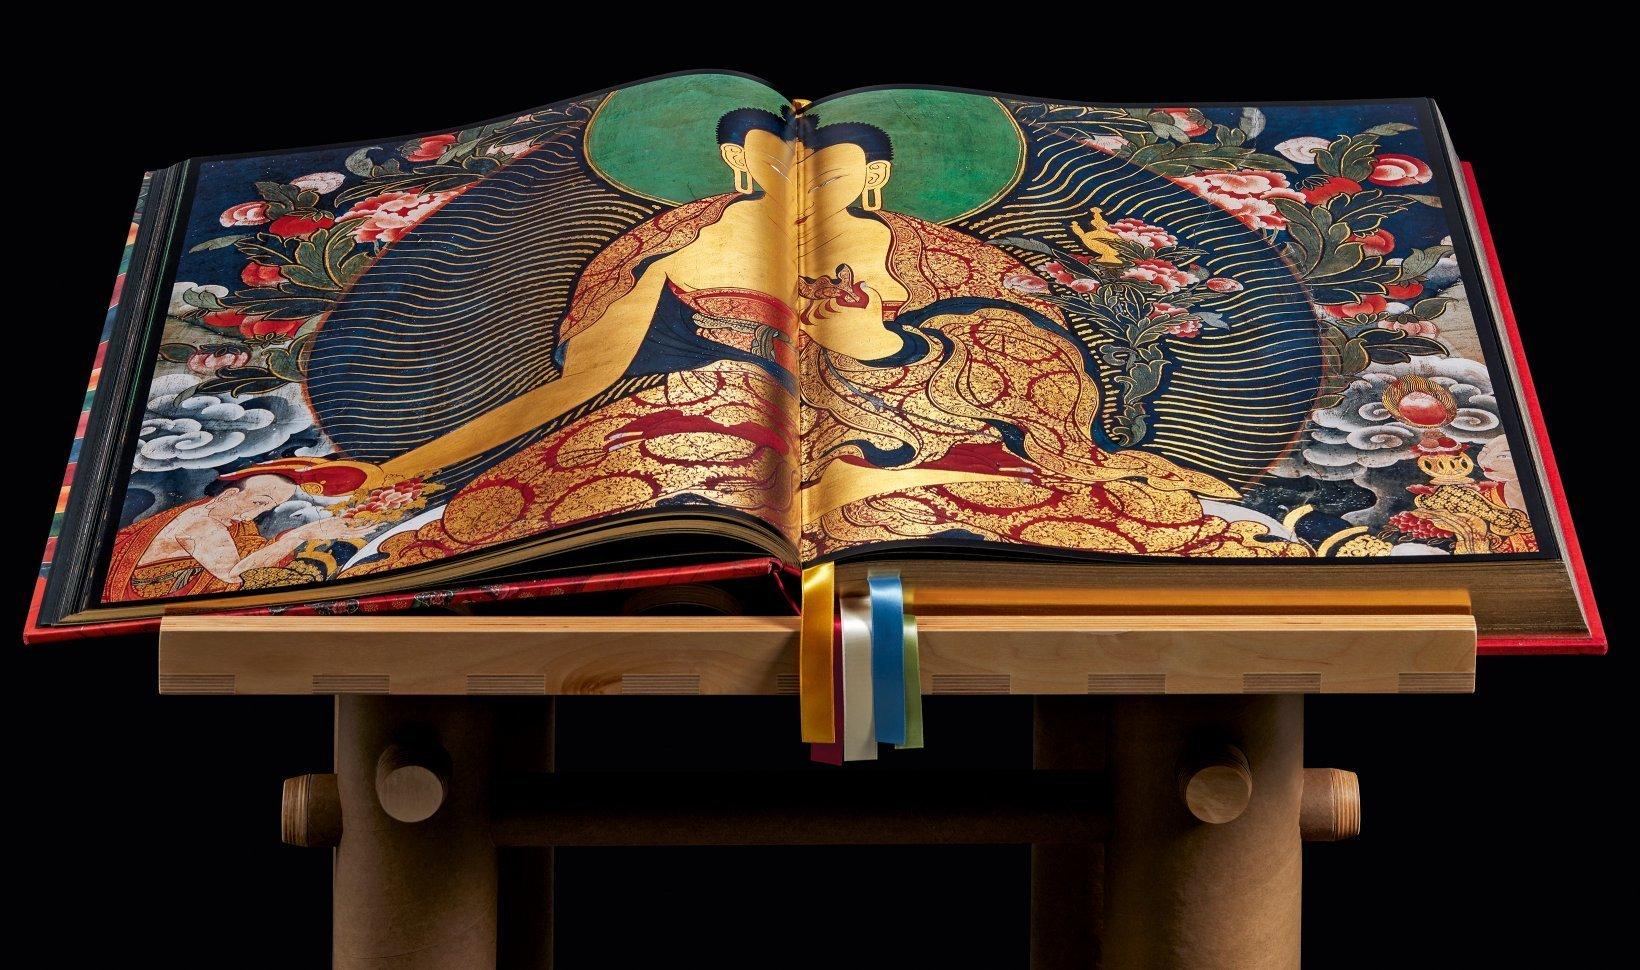 Tibetan Thomas Laird's Murals of Tibet Signed by the Dalai Lama with Bookstand For Sale